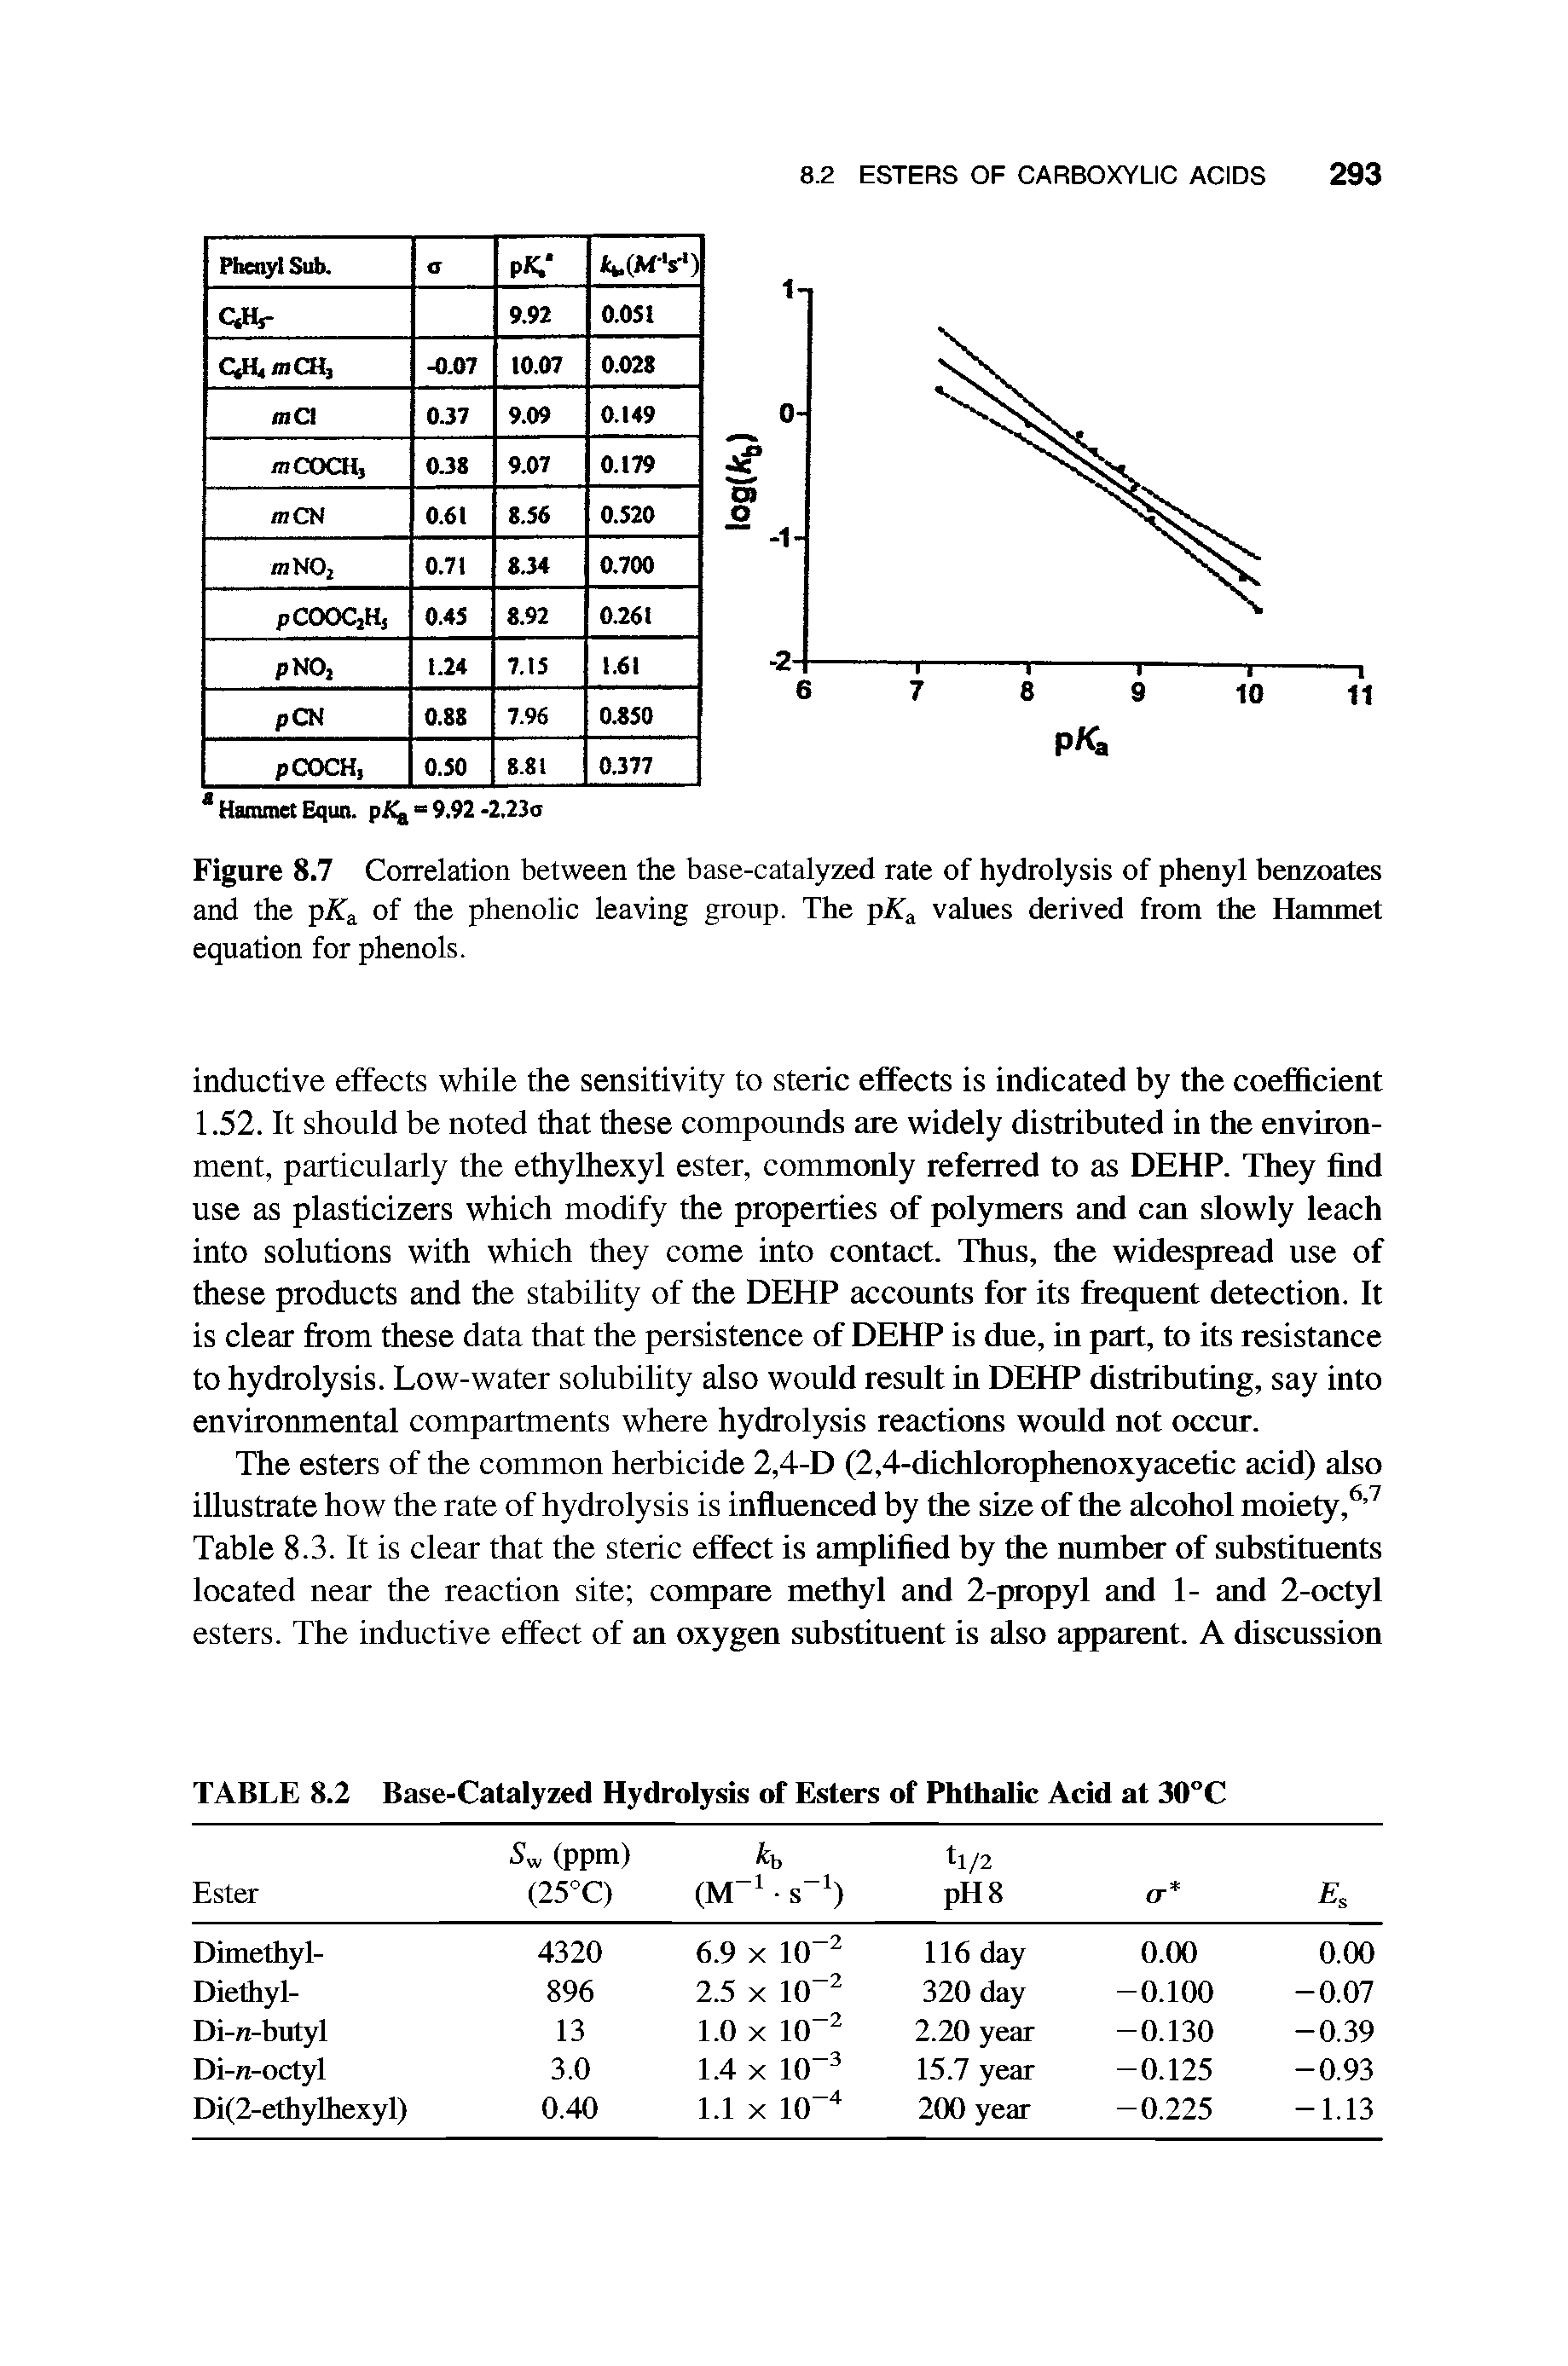 Figure 8.7 Correlation between the base-catalyzed rate of hydrolysis of phenyl benzoates and the of the phenolic leaving group. The pAT values derived from the Hammet equation for phenols.